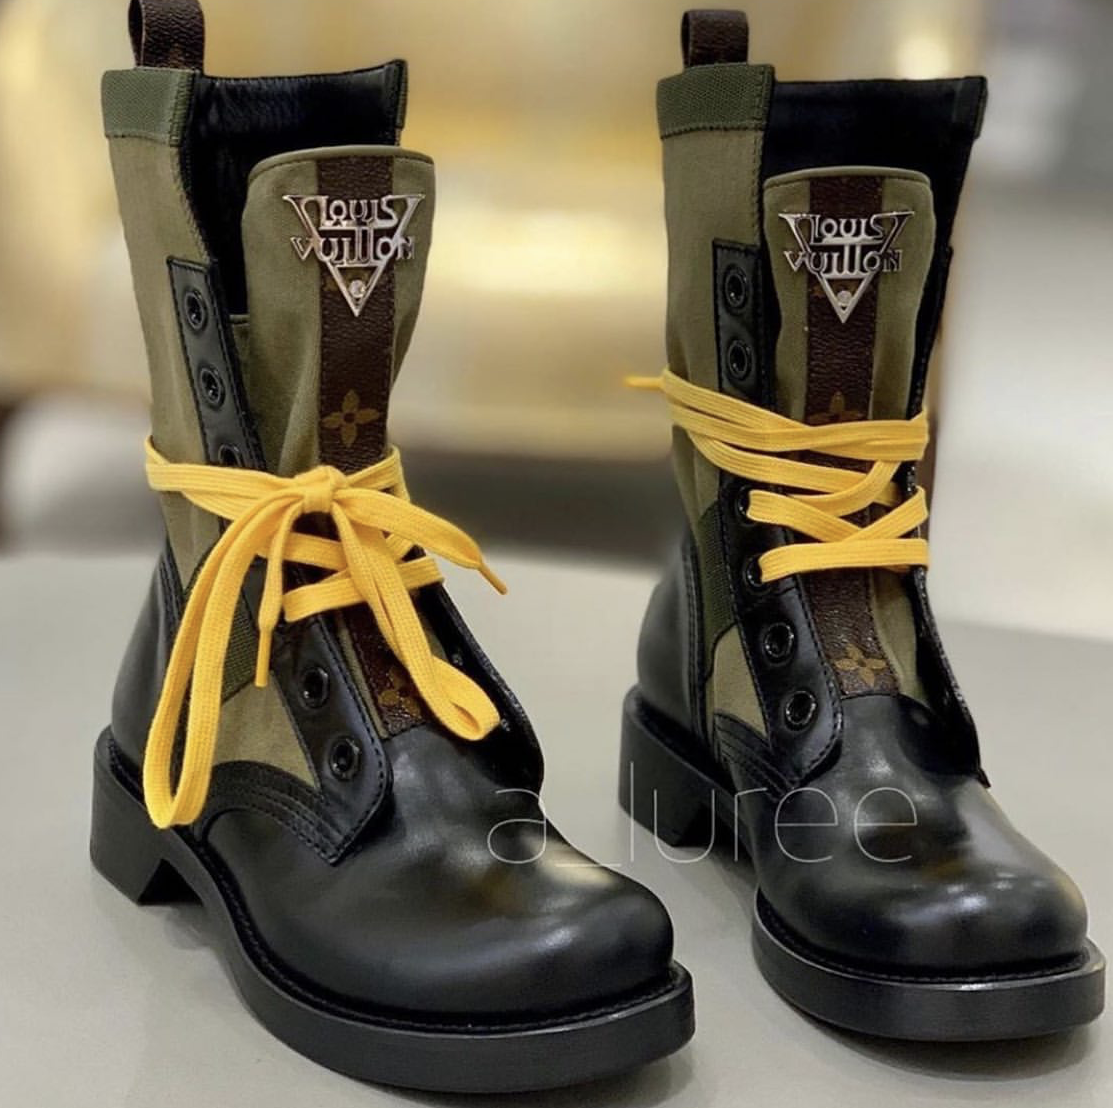 Bomb_Product_of_the_Day_Louis_Vuitton_Metropolis_Flat_Ranger_Boots